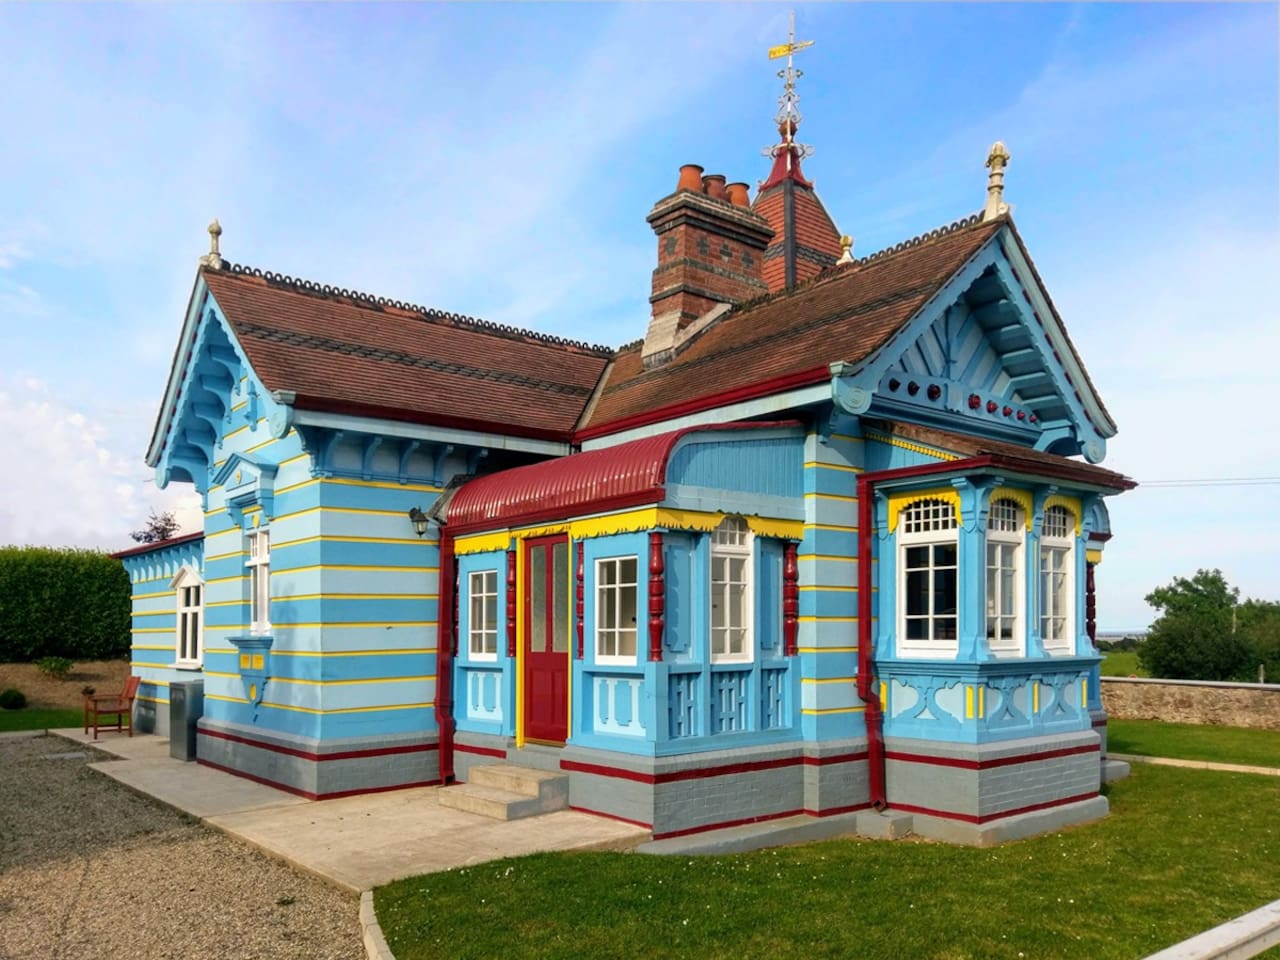 The Doll's House - Rathaspeck Manor